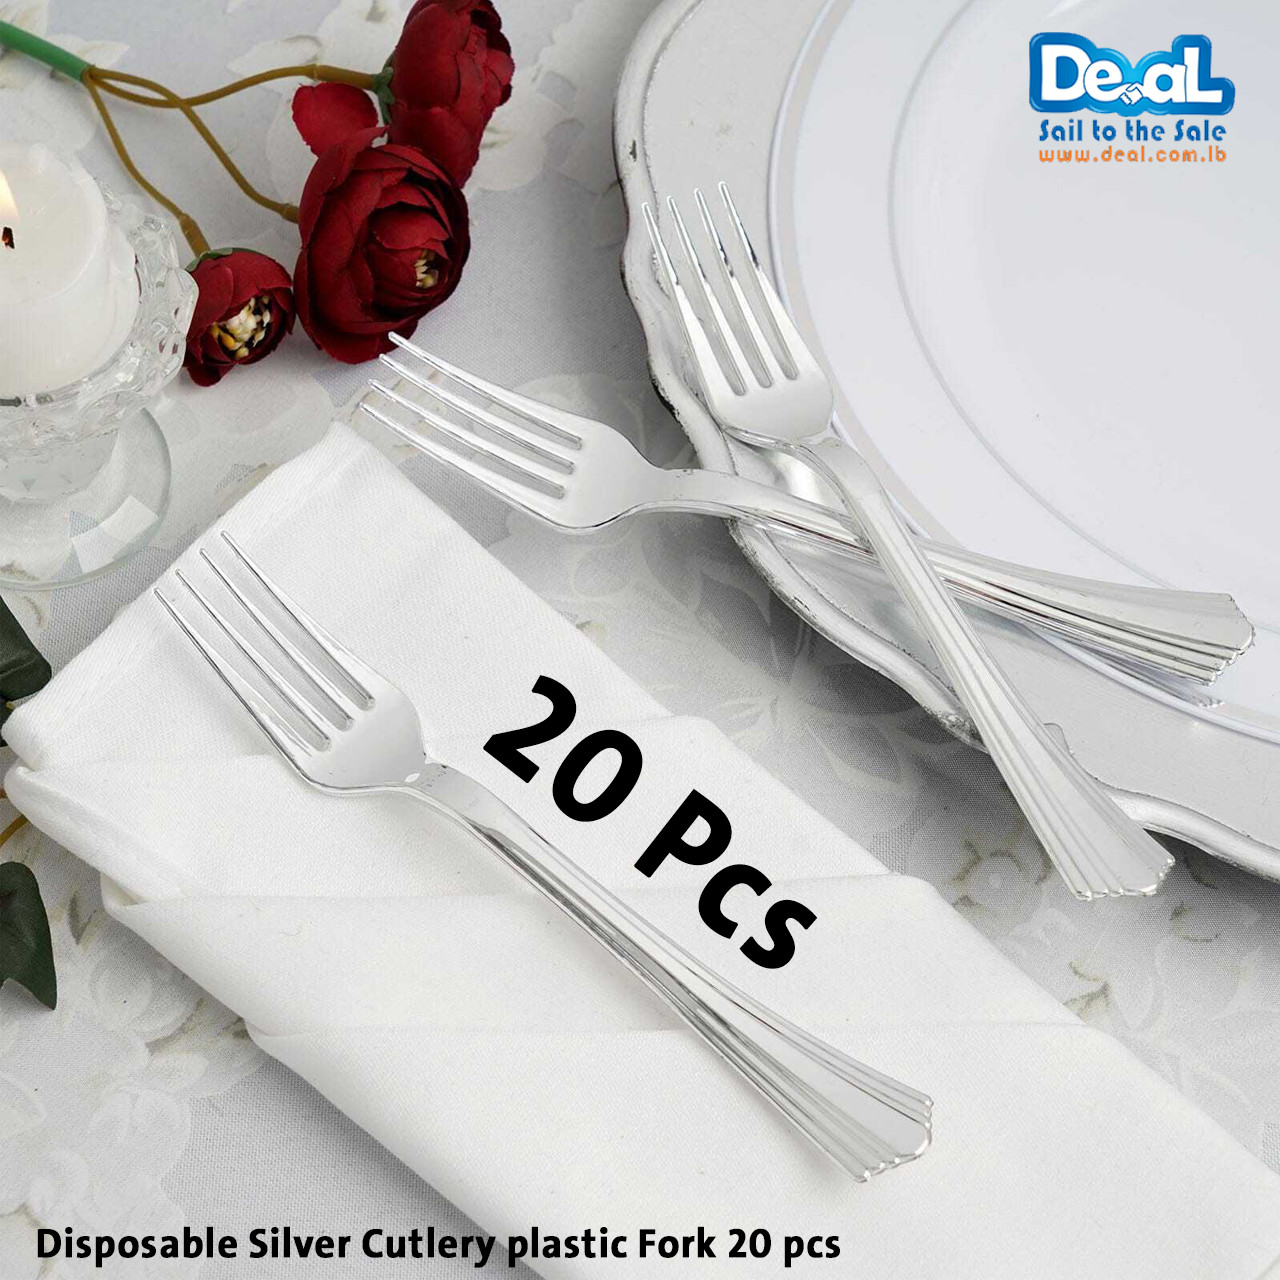 Disposable+Silver+Cutlery+plastic+Fork+20+pcs